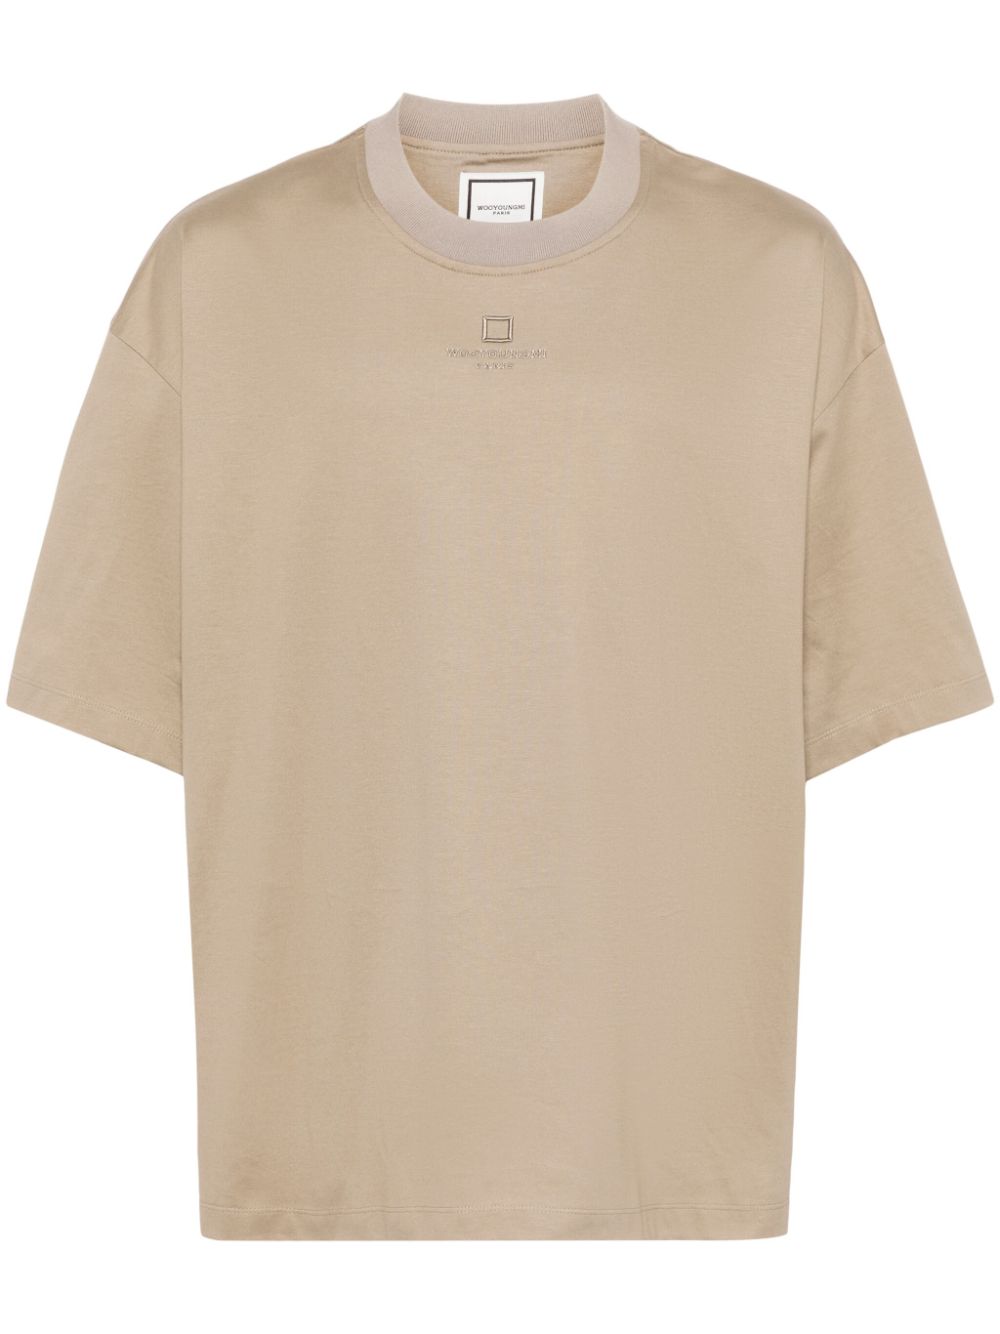 Wooyoungmi logo-embroidered cotton T-shirt - Brown von Wooyoungmi